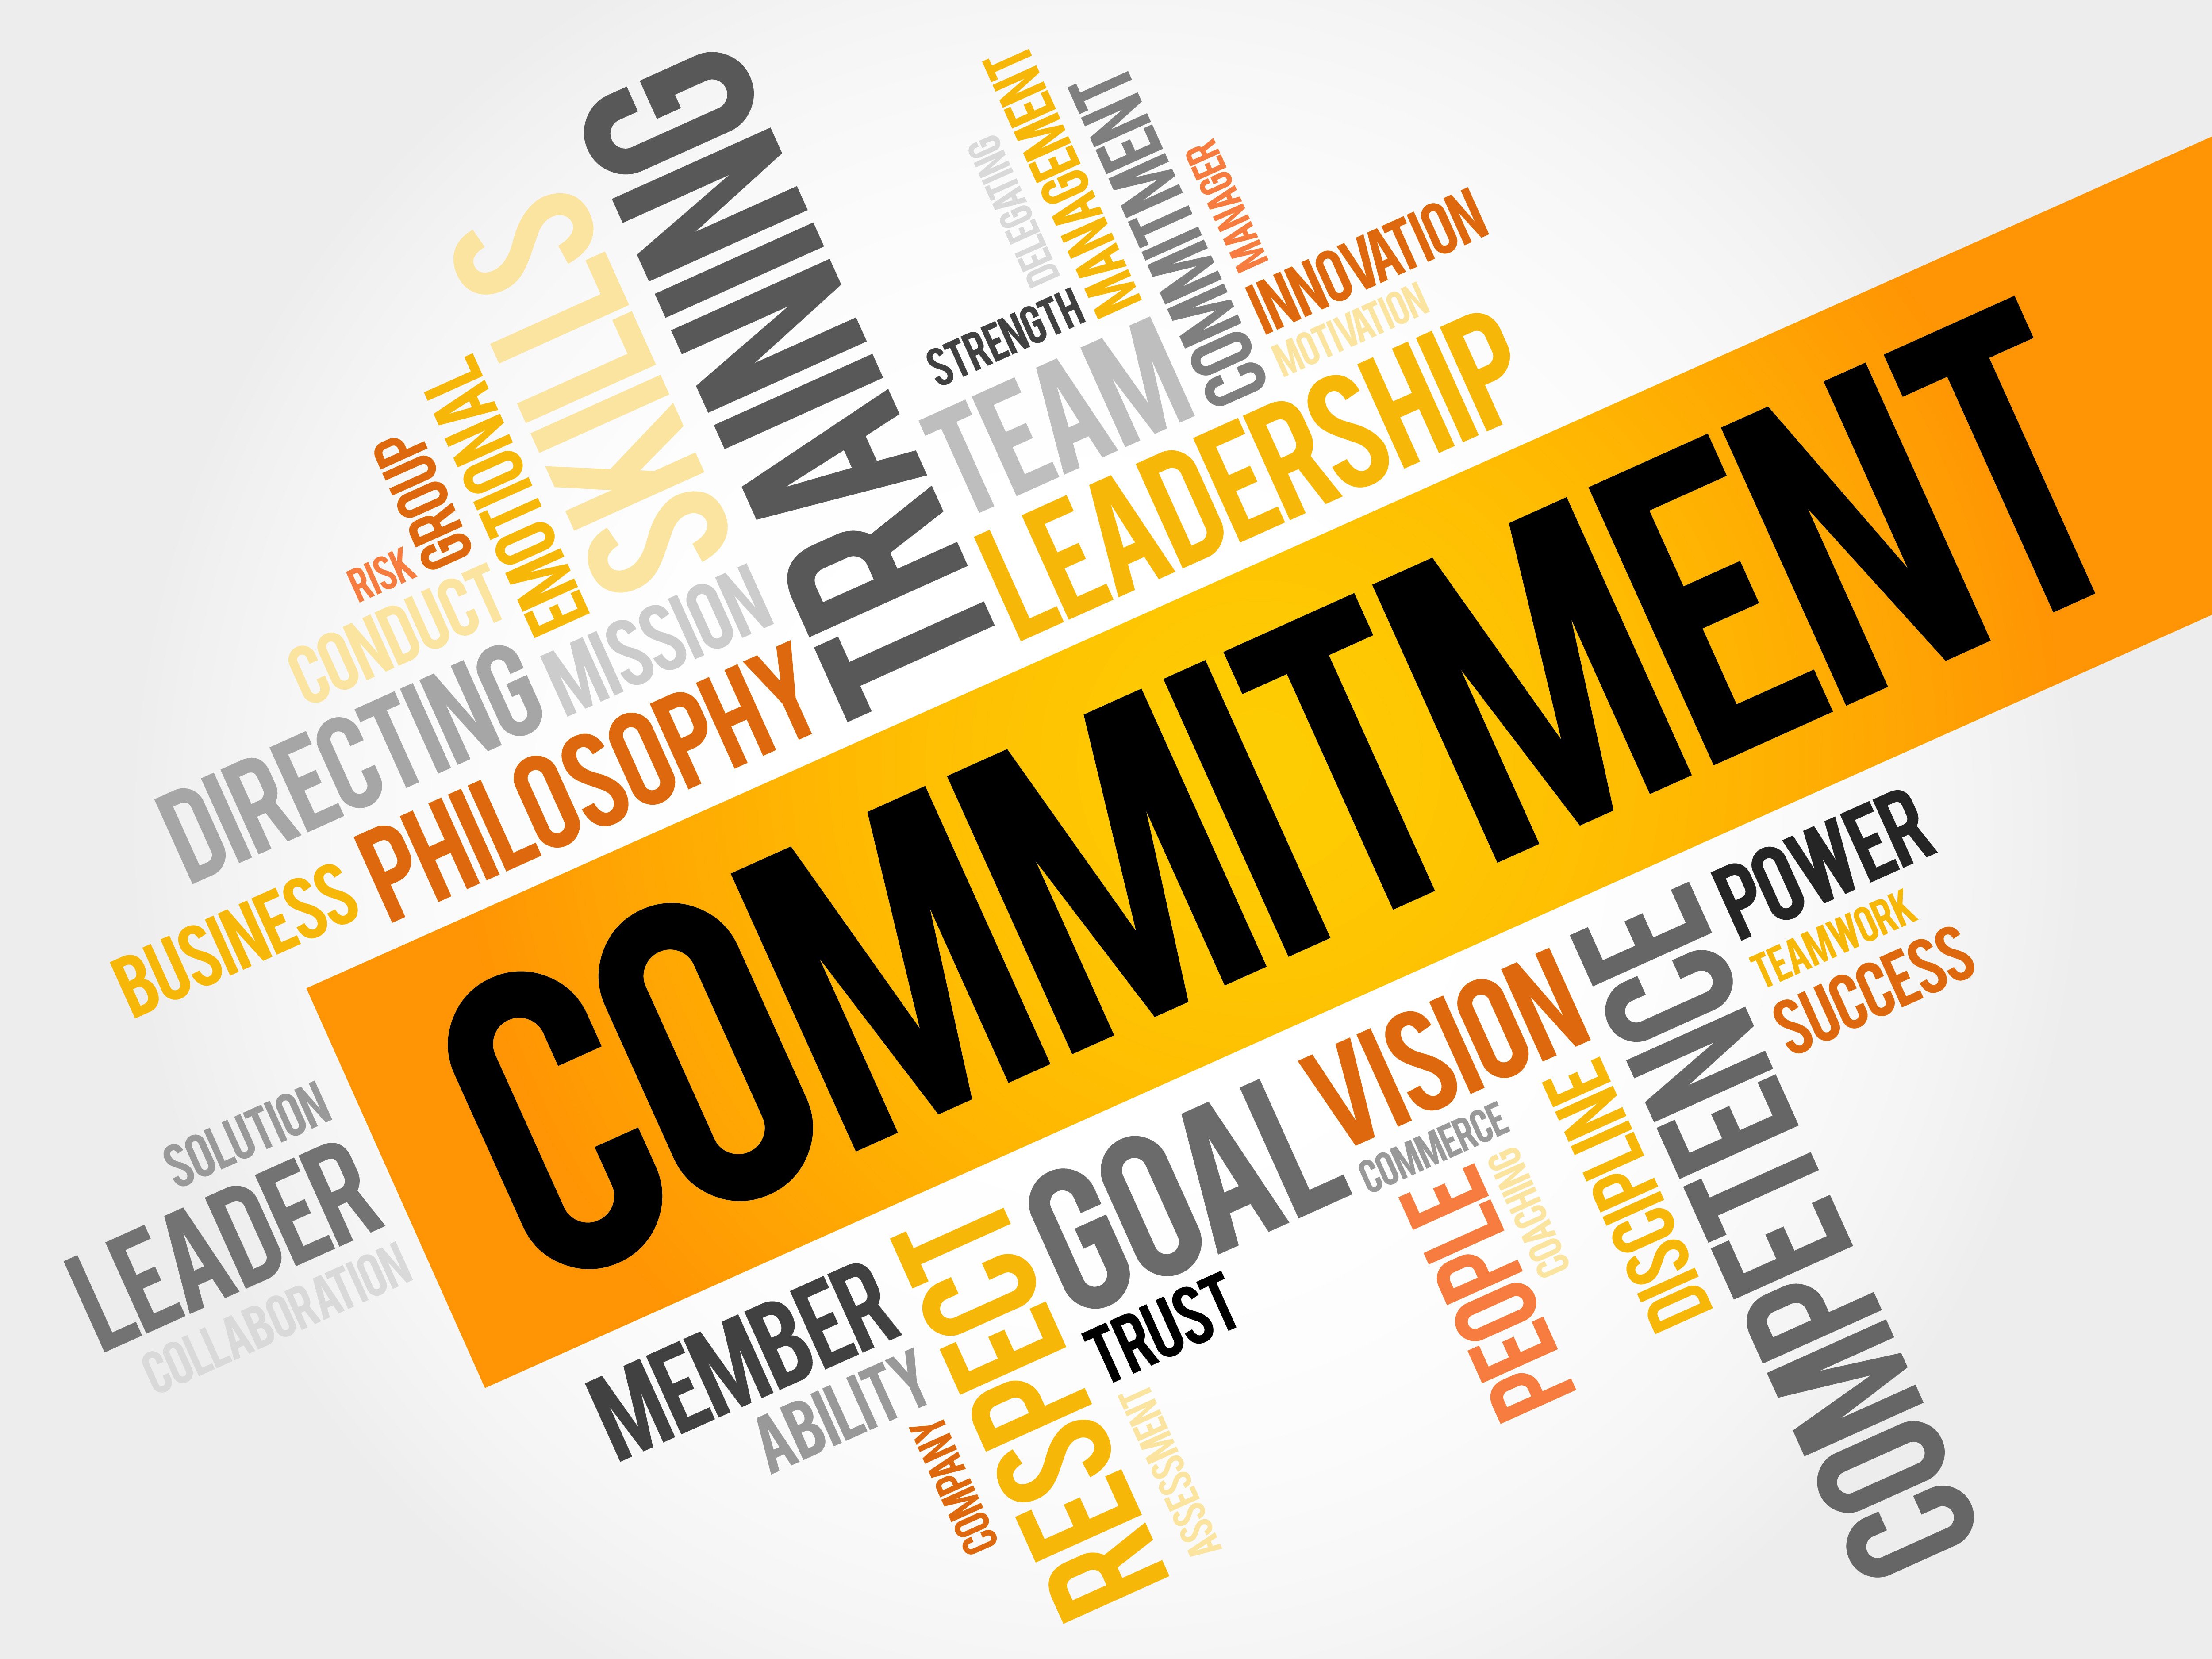 being committed